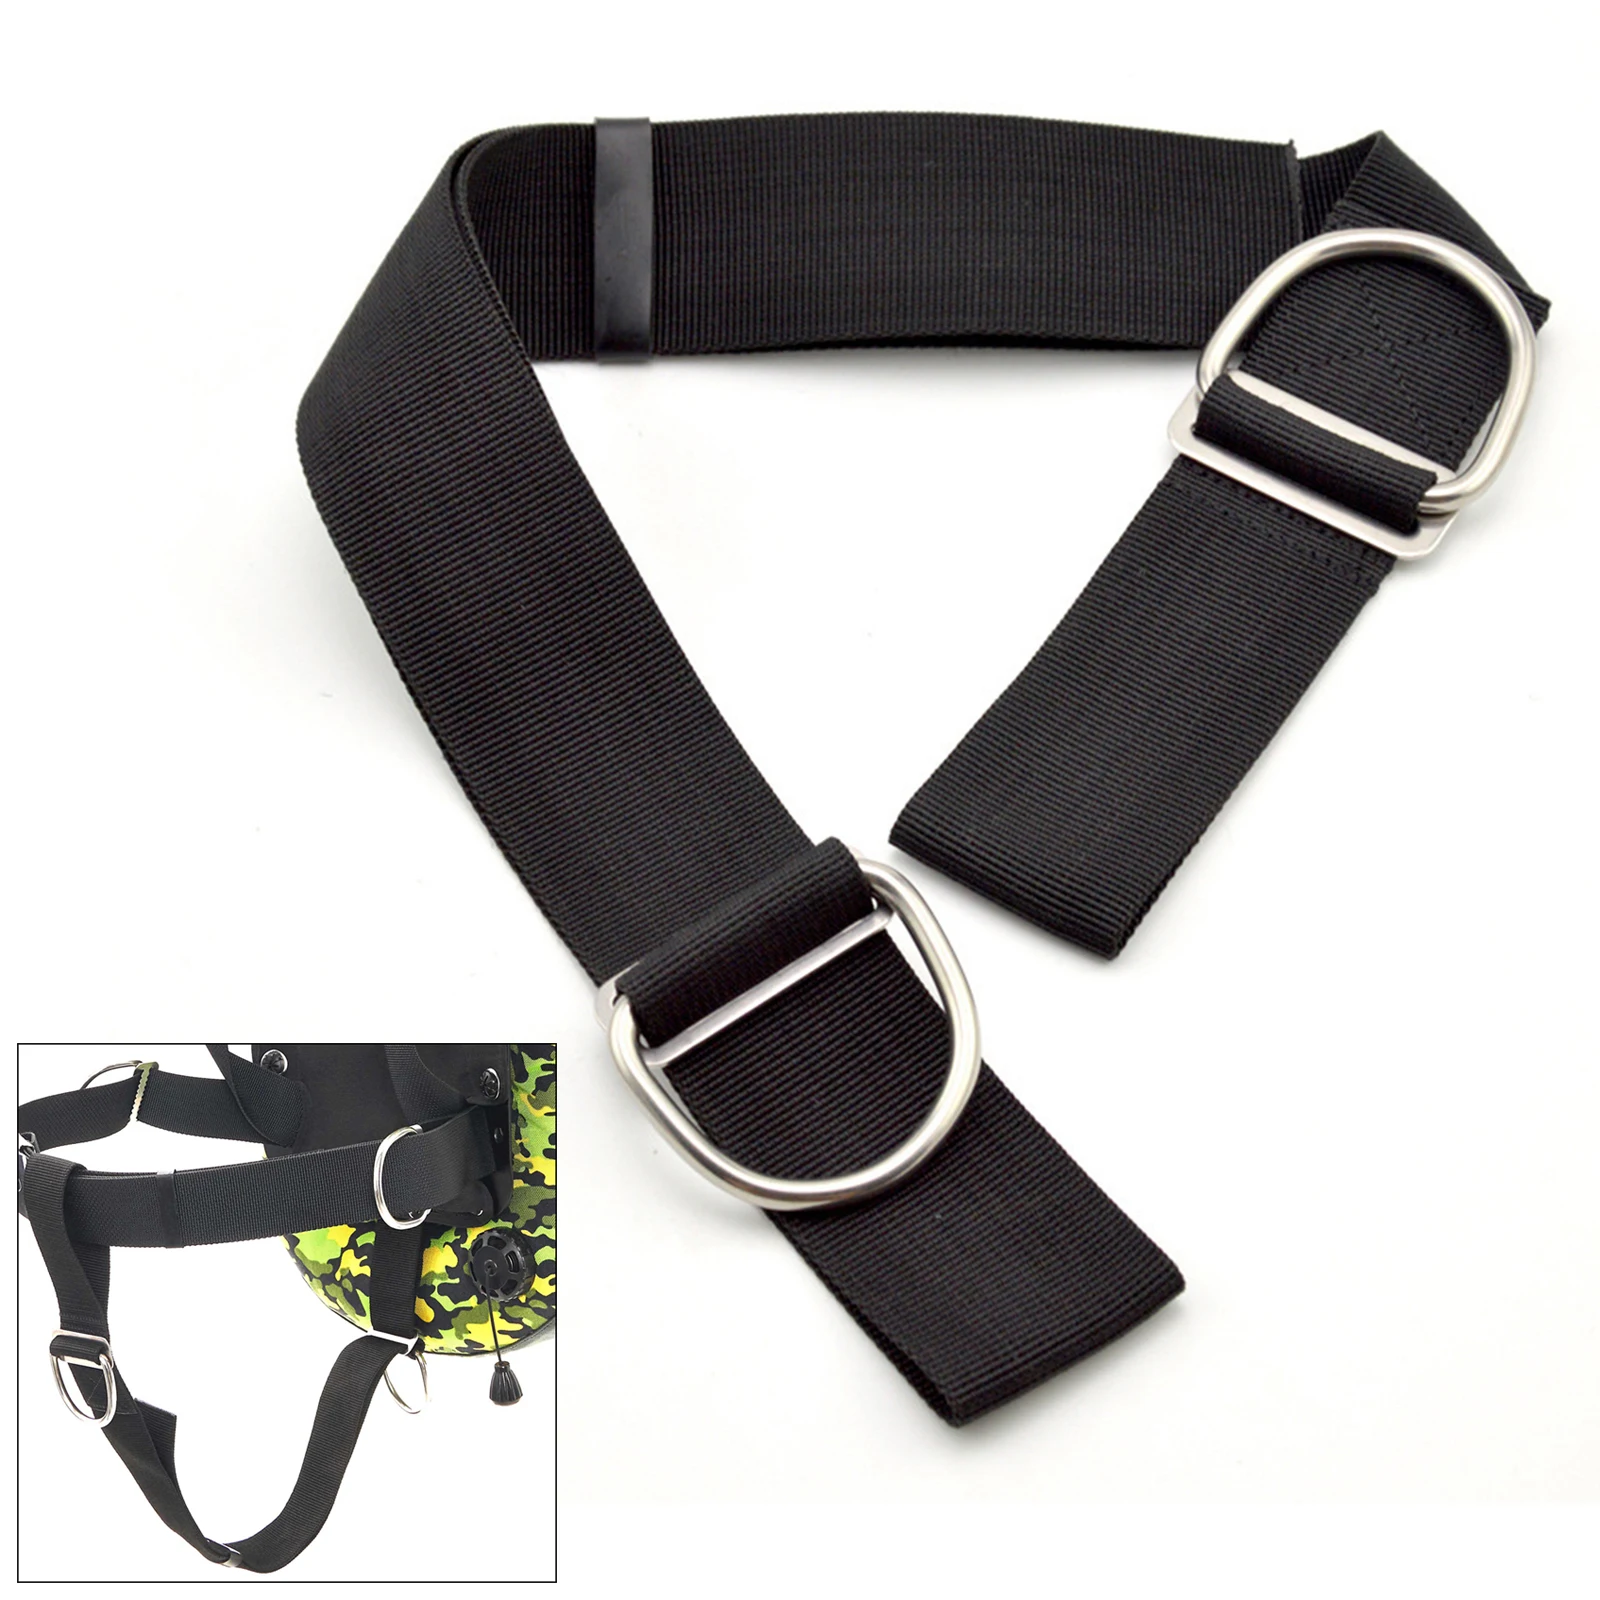 Tech Dive Crotch Strap with 2 D-rings 2inch Divers Gear Crotch Straps Black